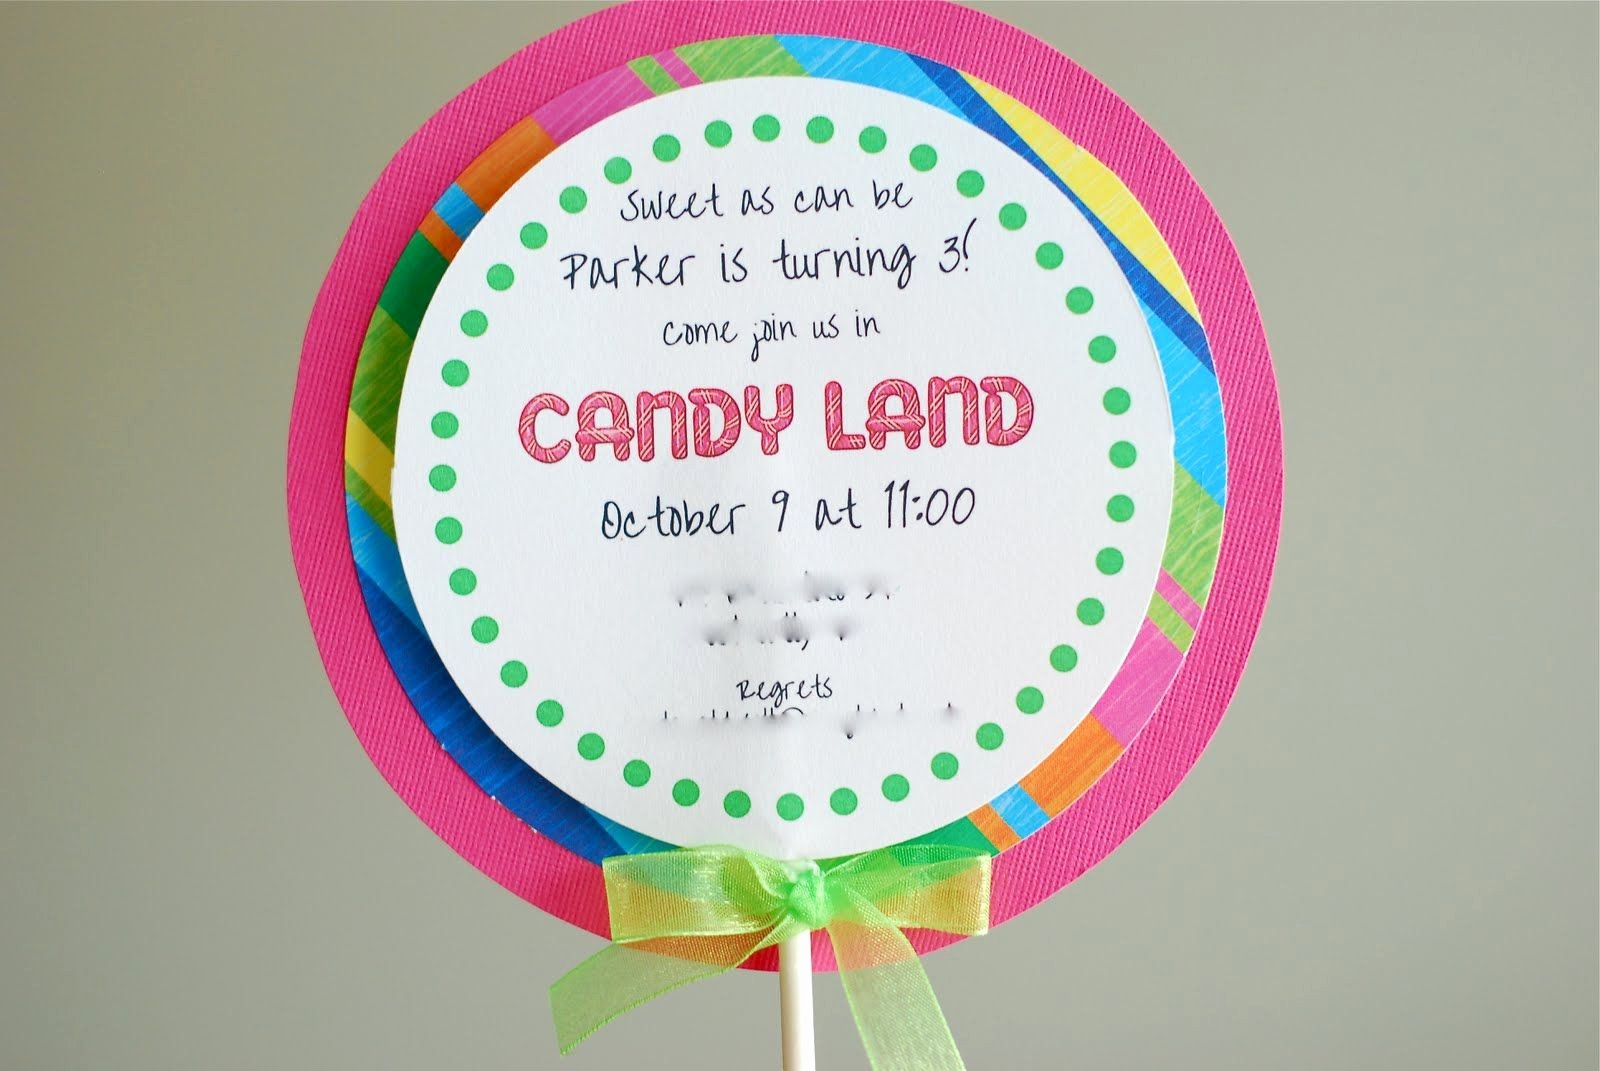 Free Candyland Invitation Template Inspirational Free Printable Candyland Invitation Templates